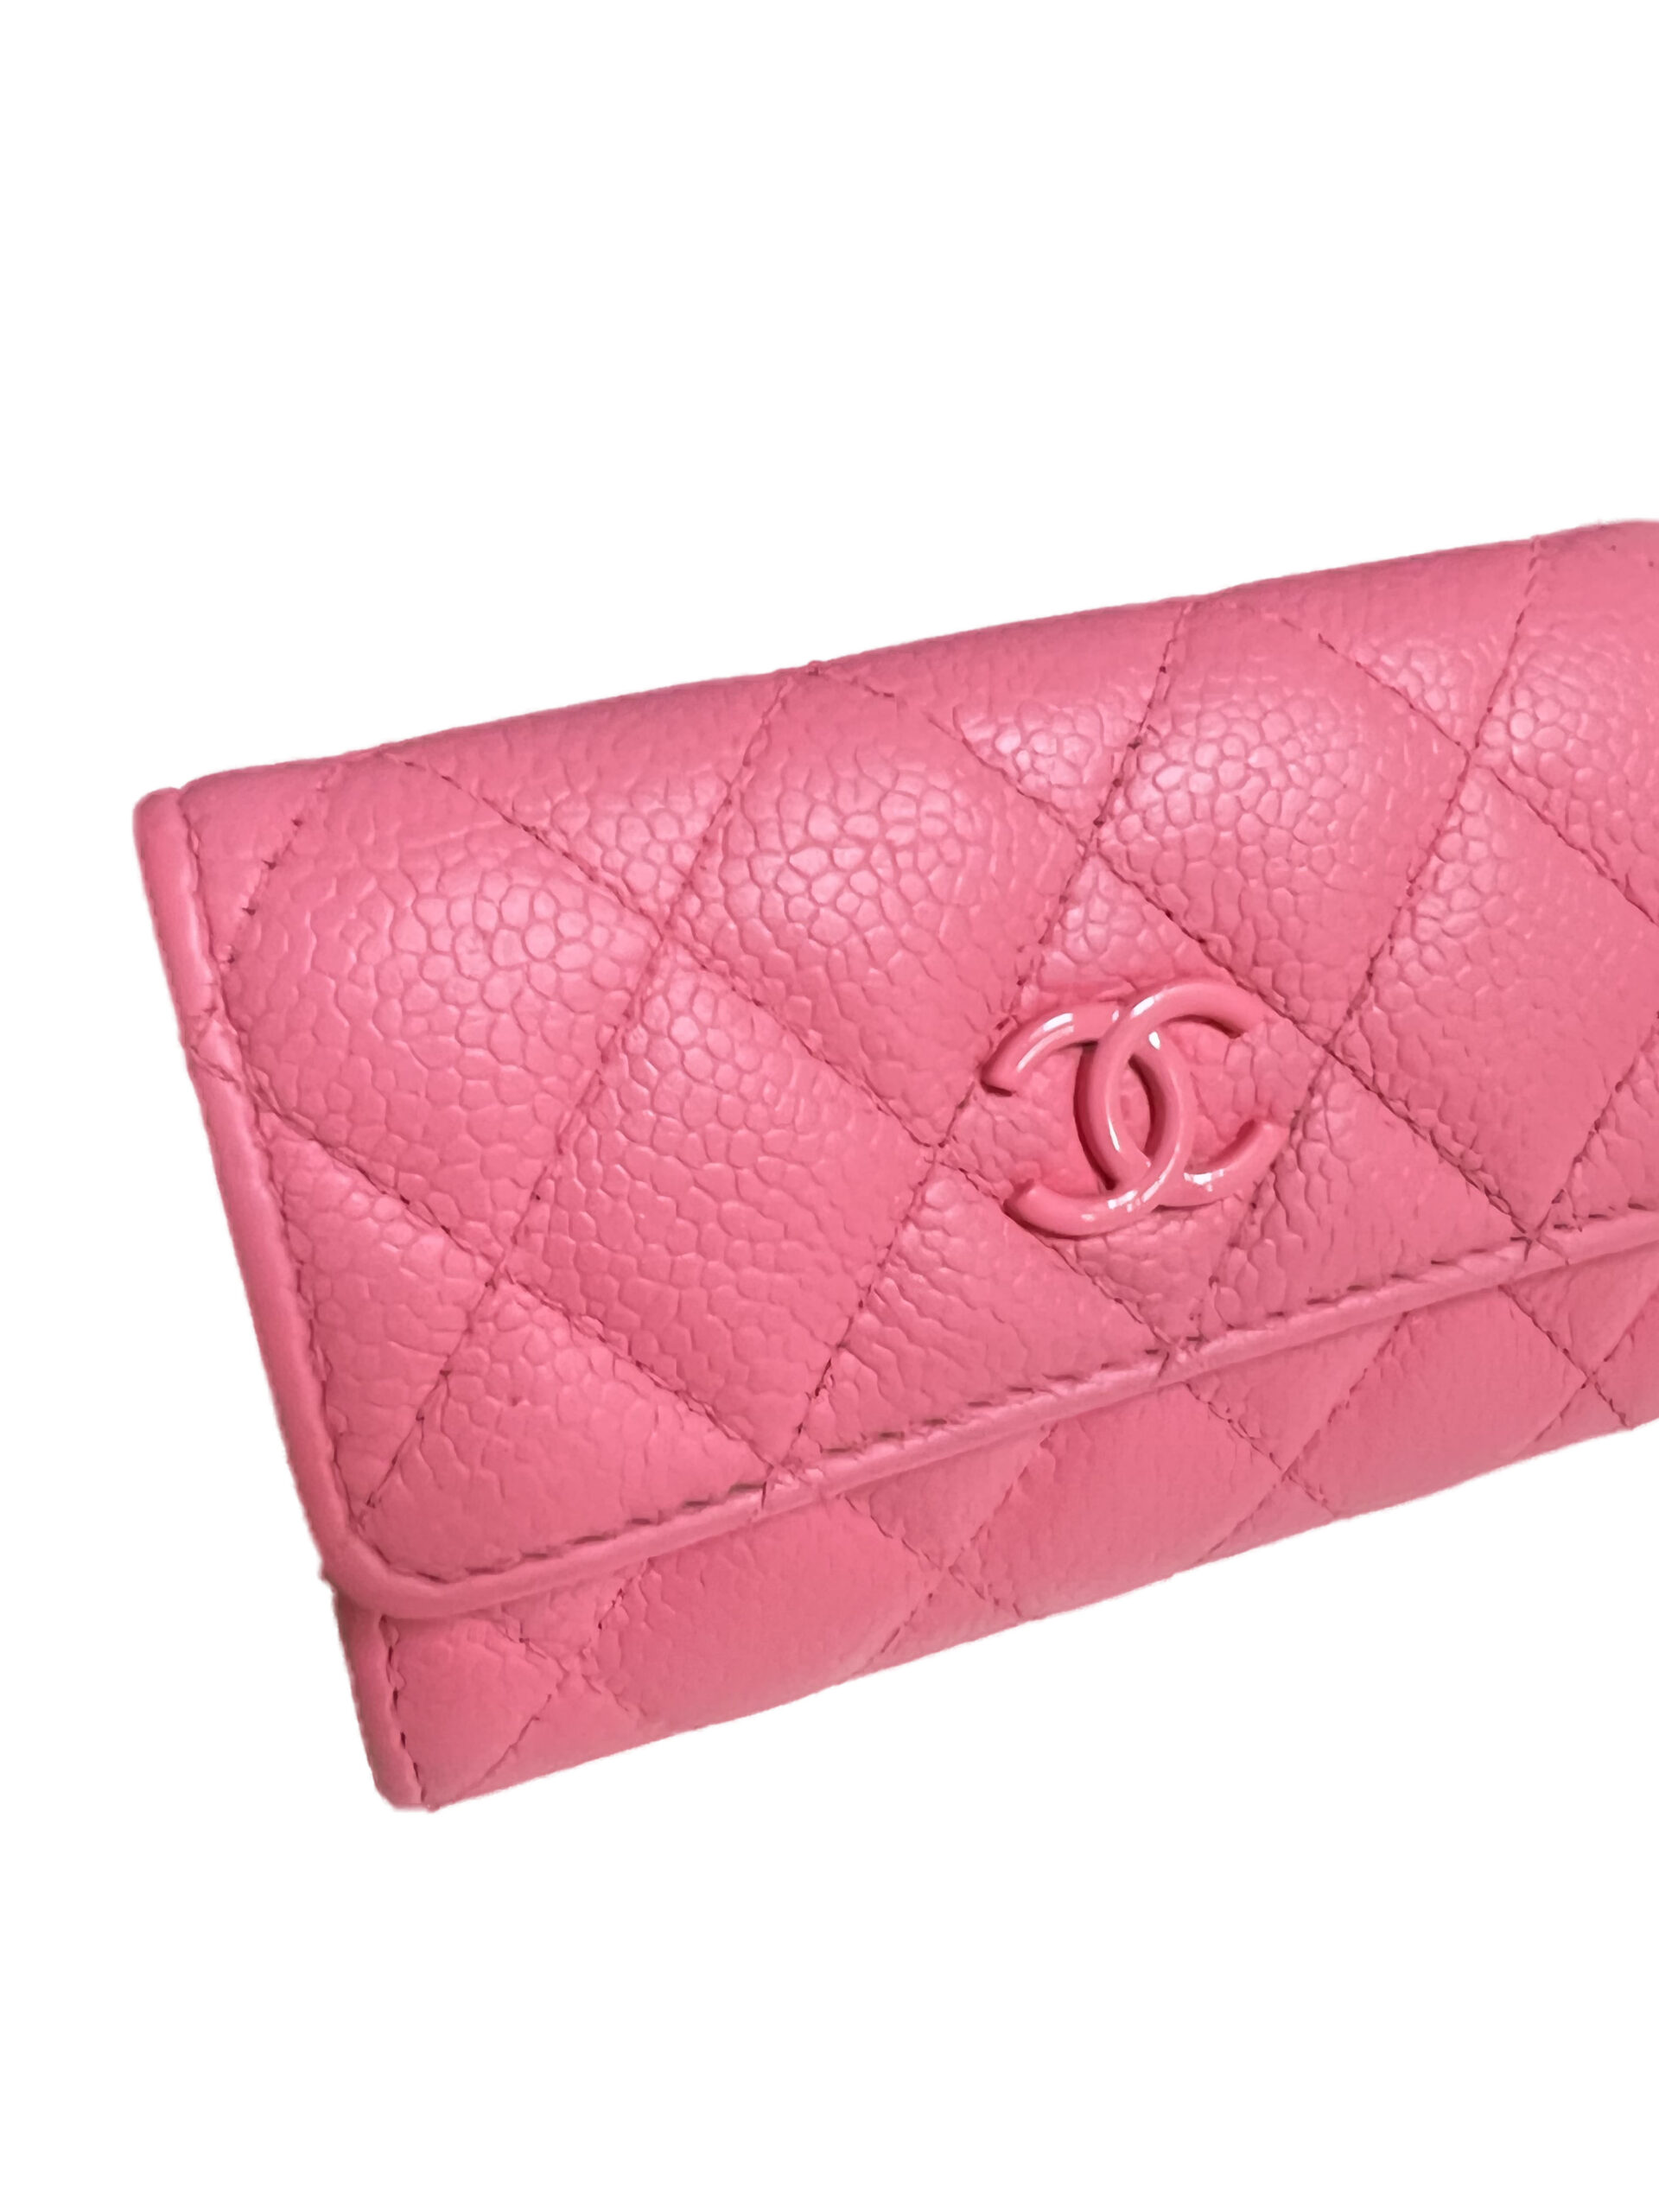 sold-out CHANEL マトラッセ コインケース - Ur